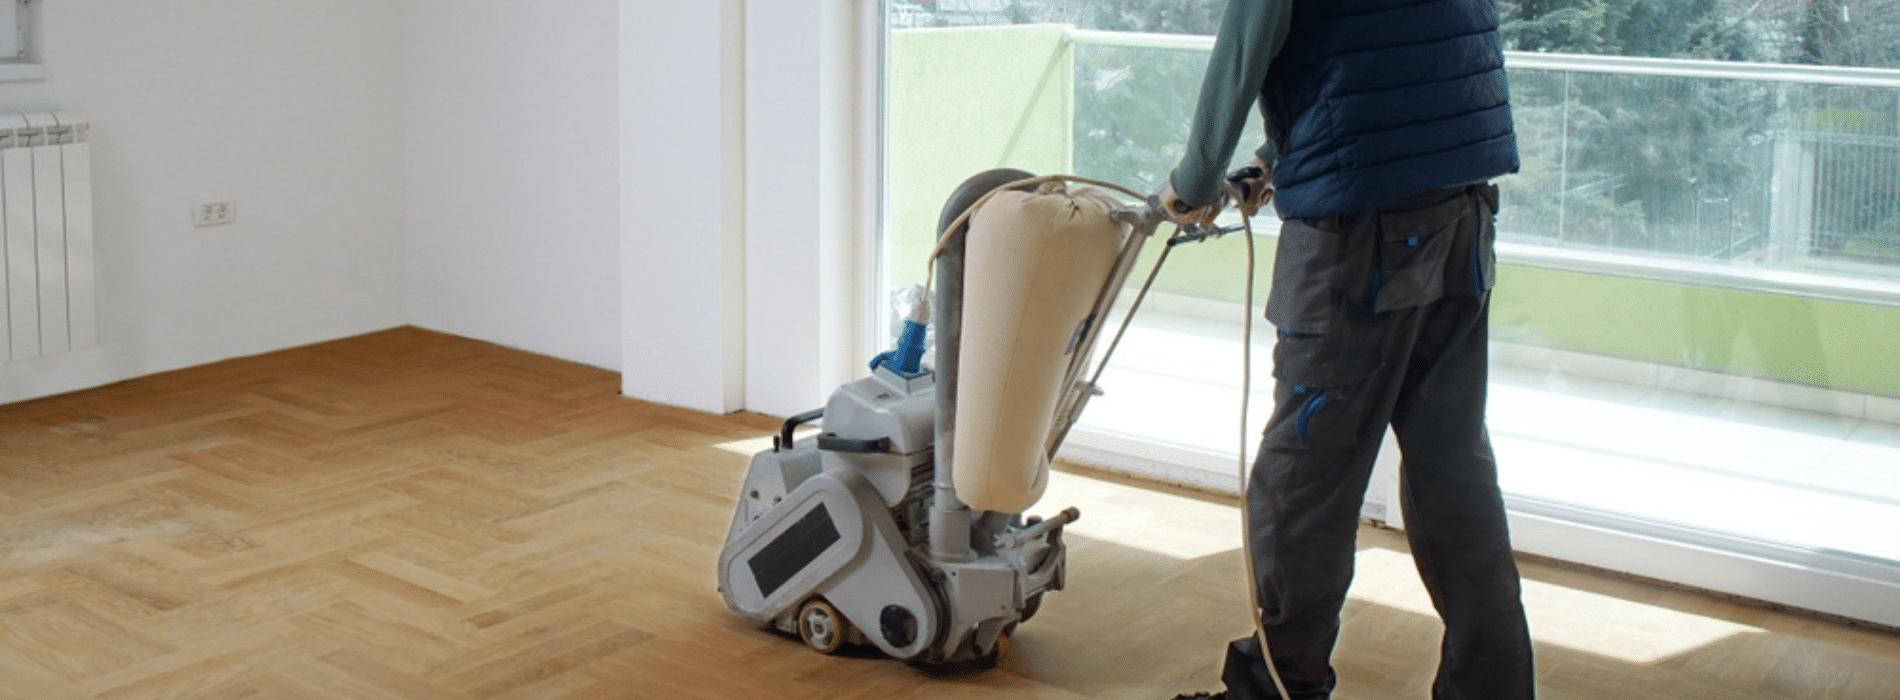 In Rotherhithe, SE15, Mr Sander® use a Bona Belt Effect (2.2 kW) sander, operating at 230V and 50Hz/60Hz, to sand herringbone floors. The 250x750 mm sander, connected to a dust extraction system with a HEPA filter, ensures a clean and efficient result.